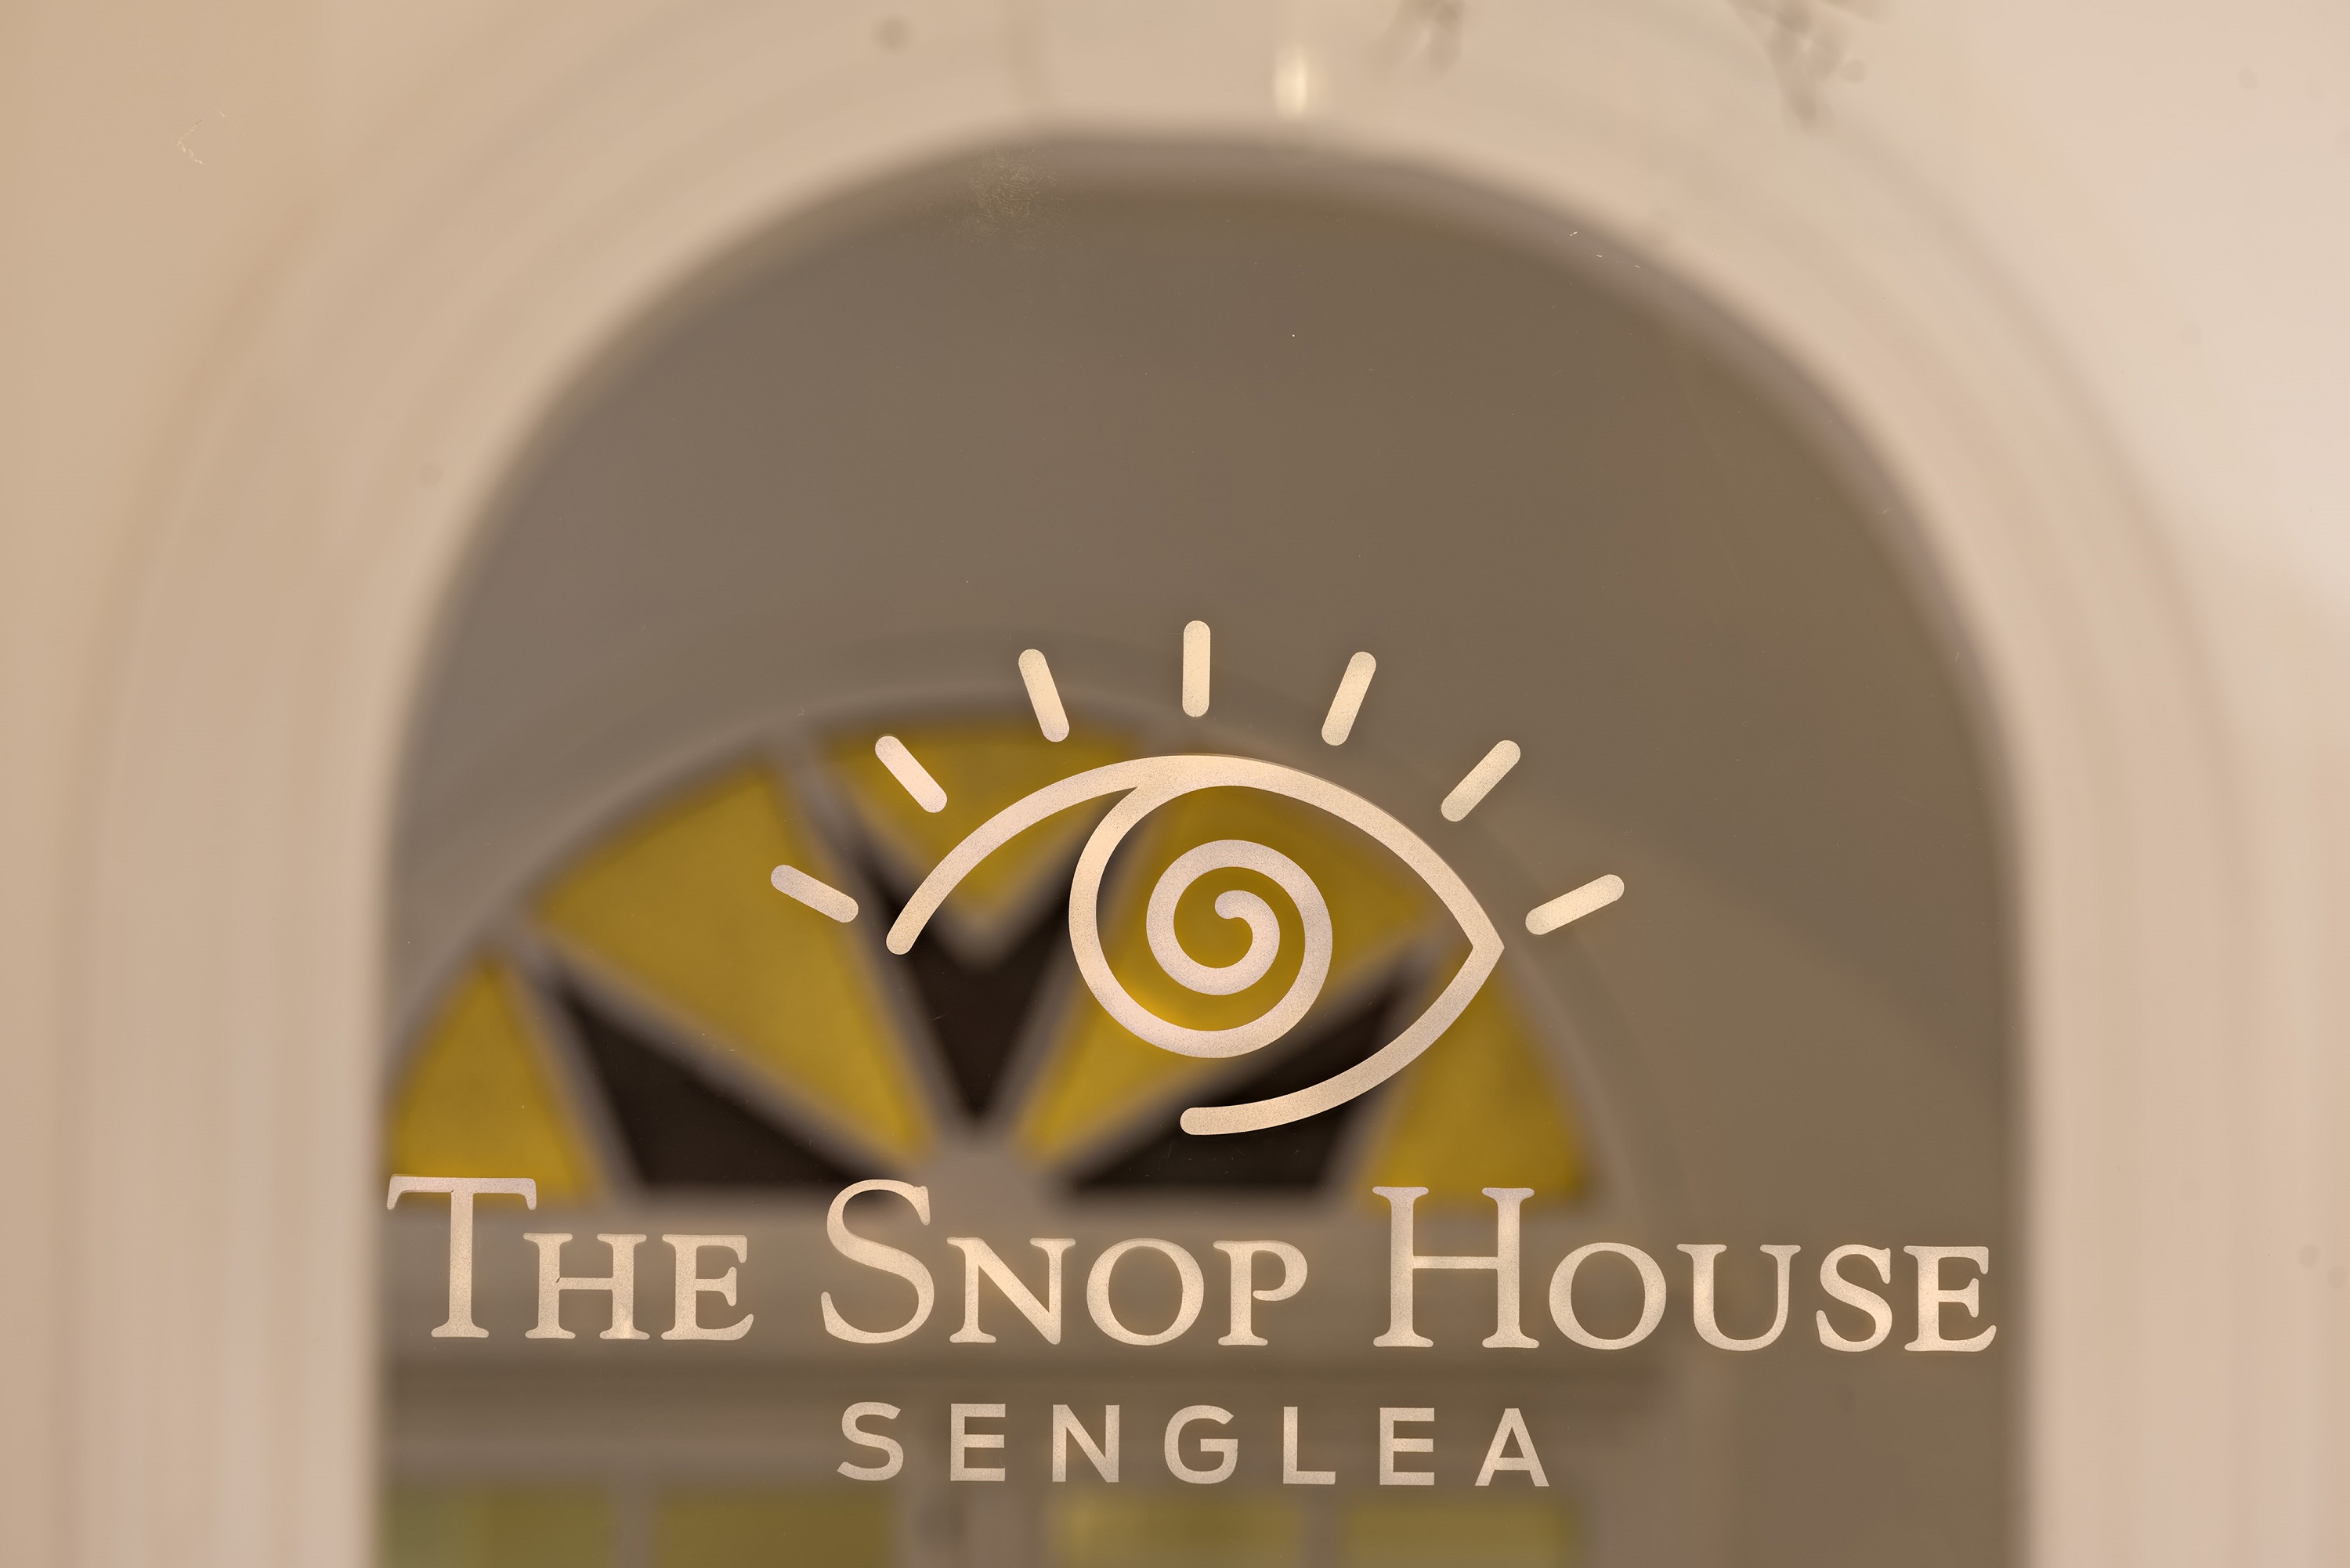 The Snop House